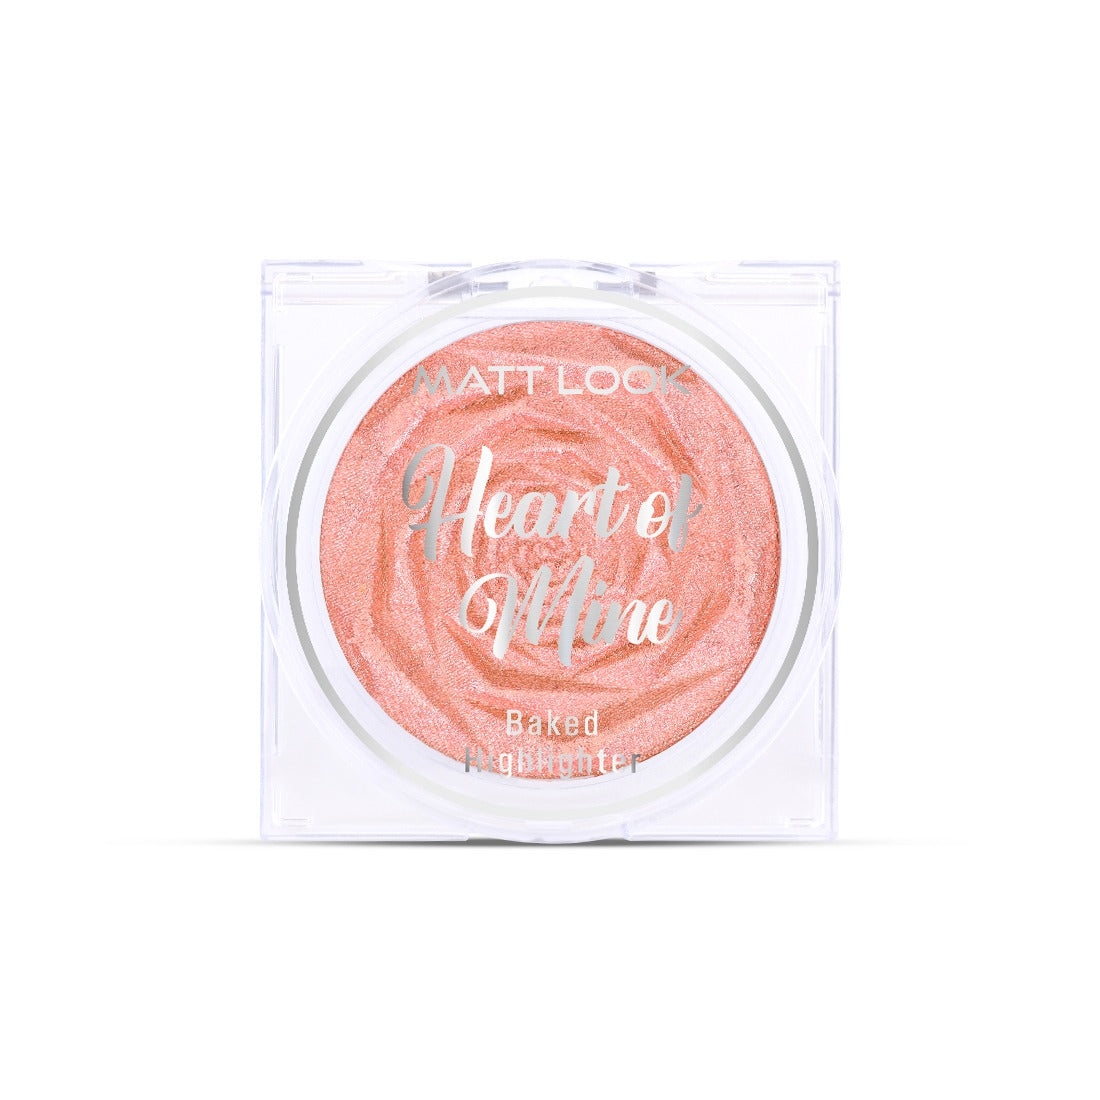 Matt Look Heart of Mine Baked Highlighter, Natural Luminous Glow, Blend seamlessly, Ultra Paralyzed Pigments, Highlighter that works wonders for face, Suitable for all skin types, Dream Light, 8gm